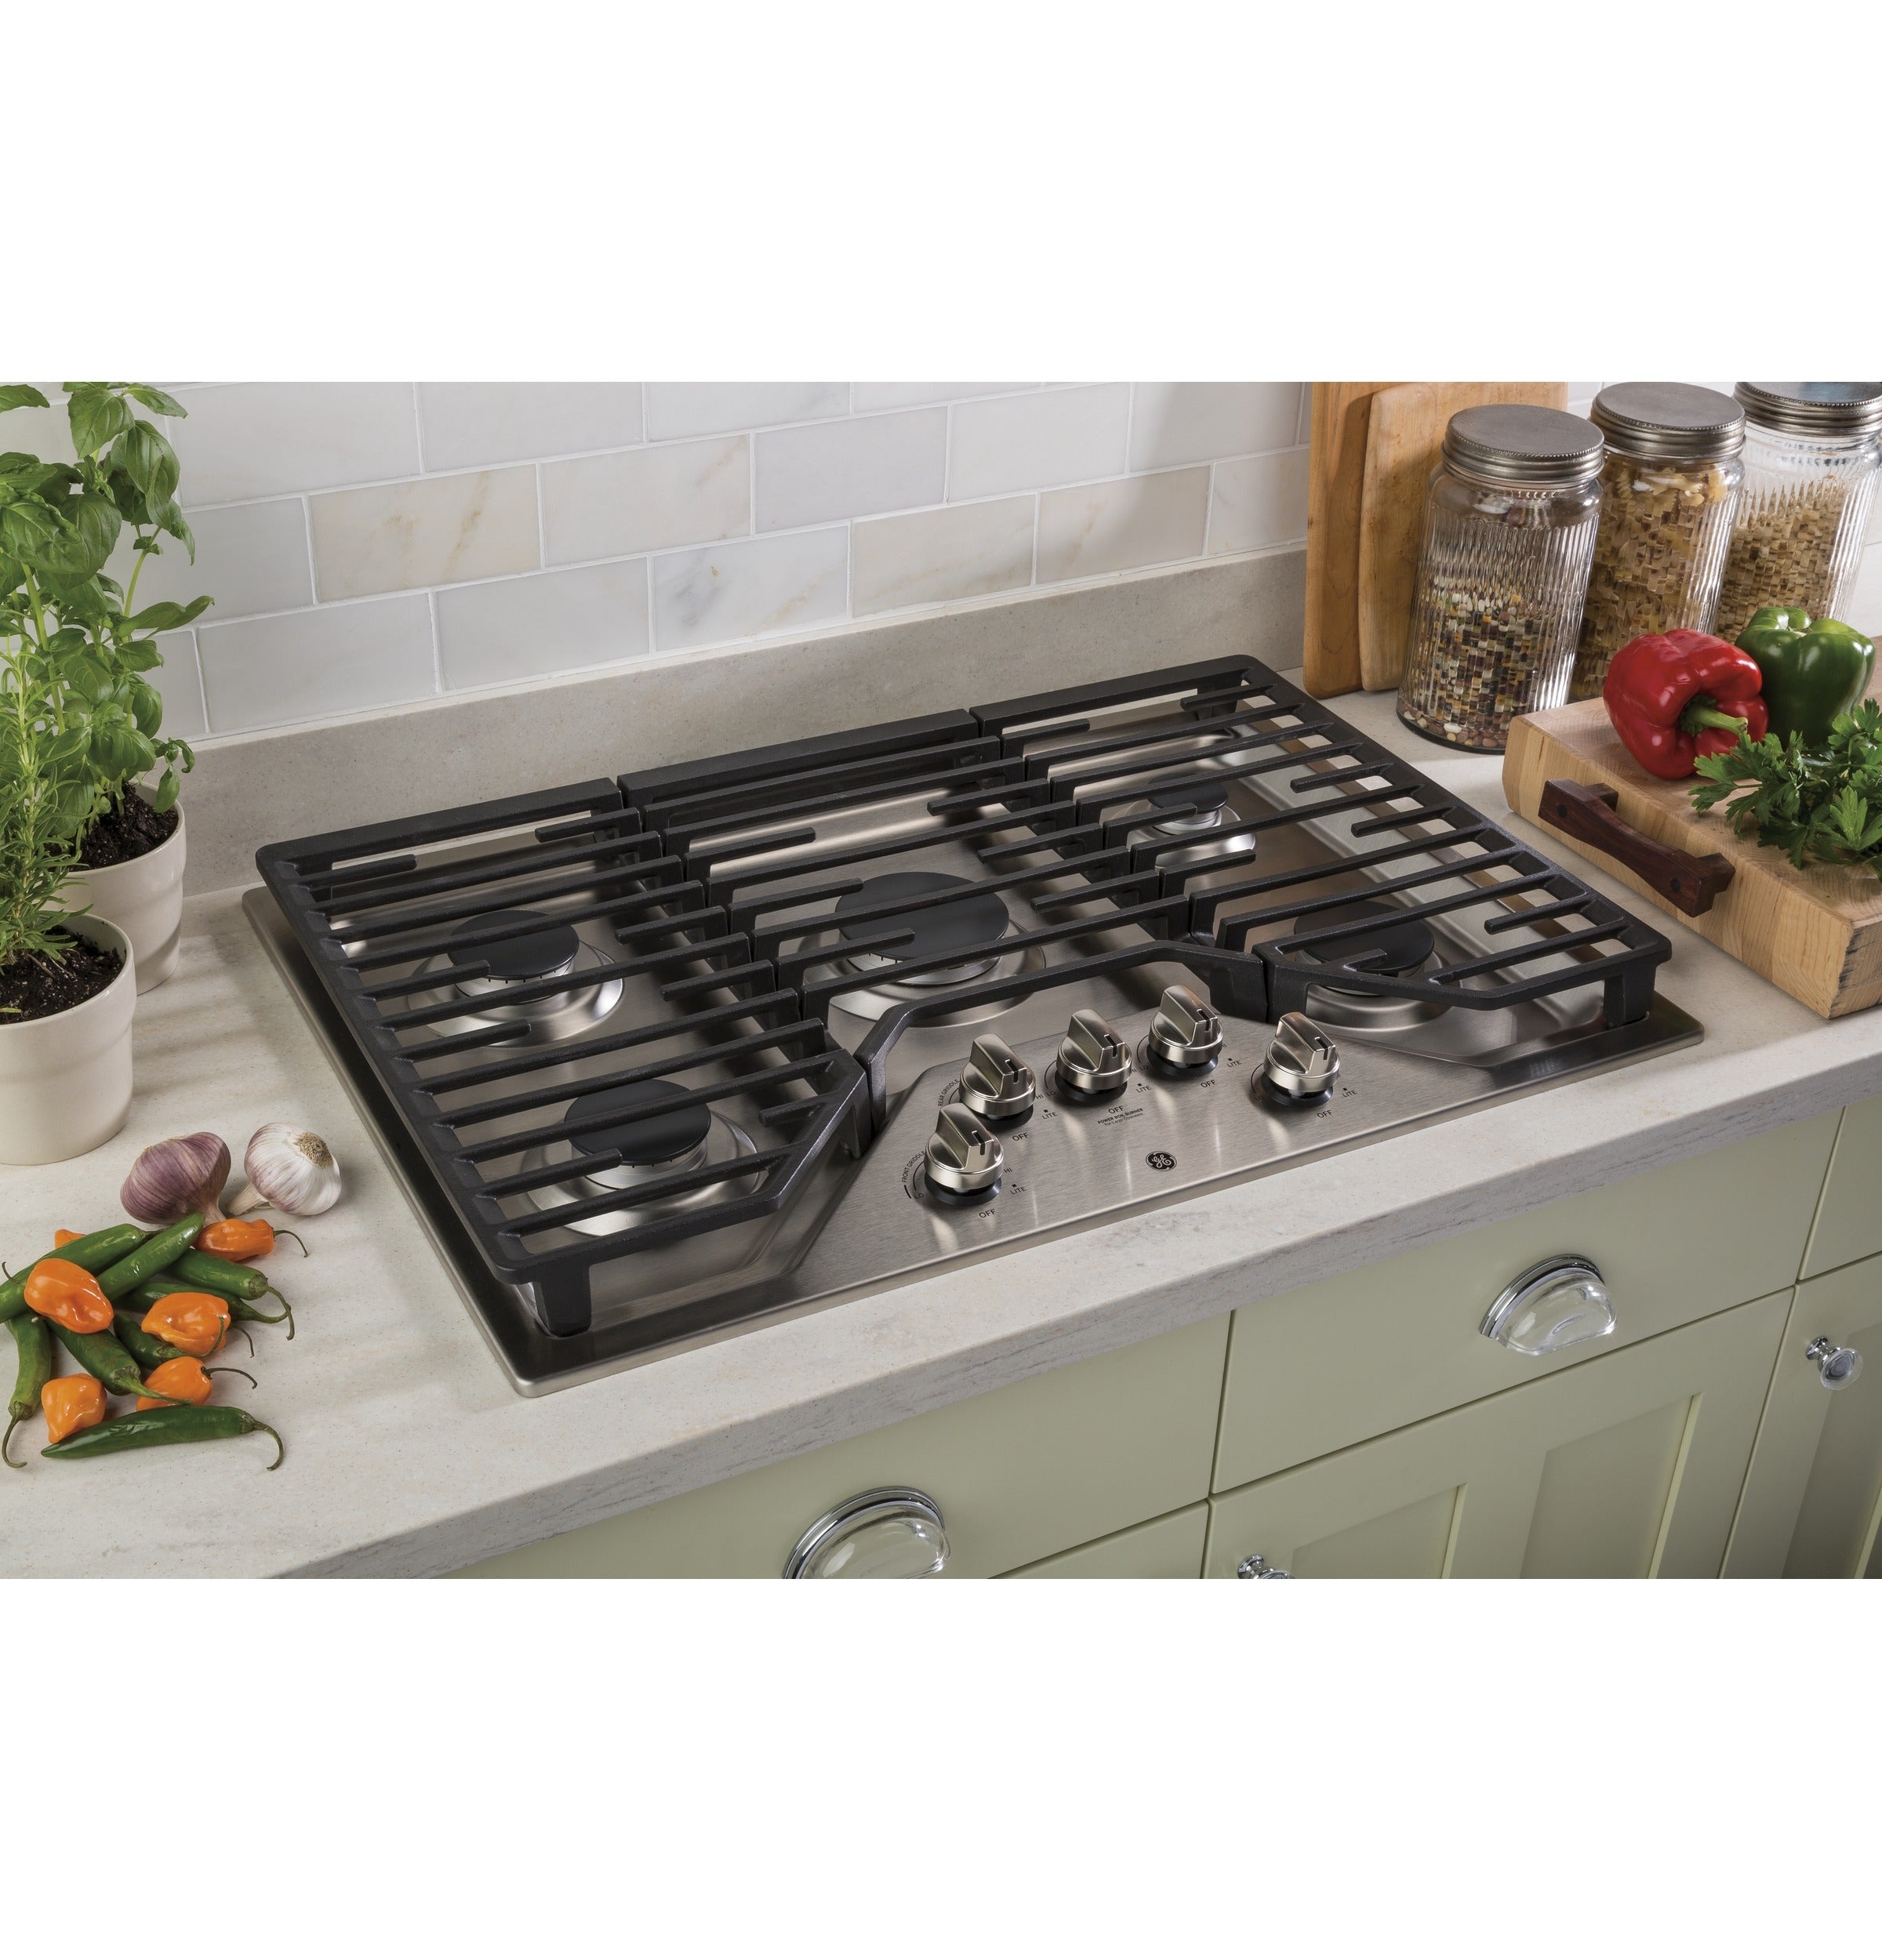 GE - 30 Inch Gas Cooktop in Stainless - JGP5030SLSS